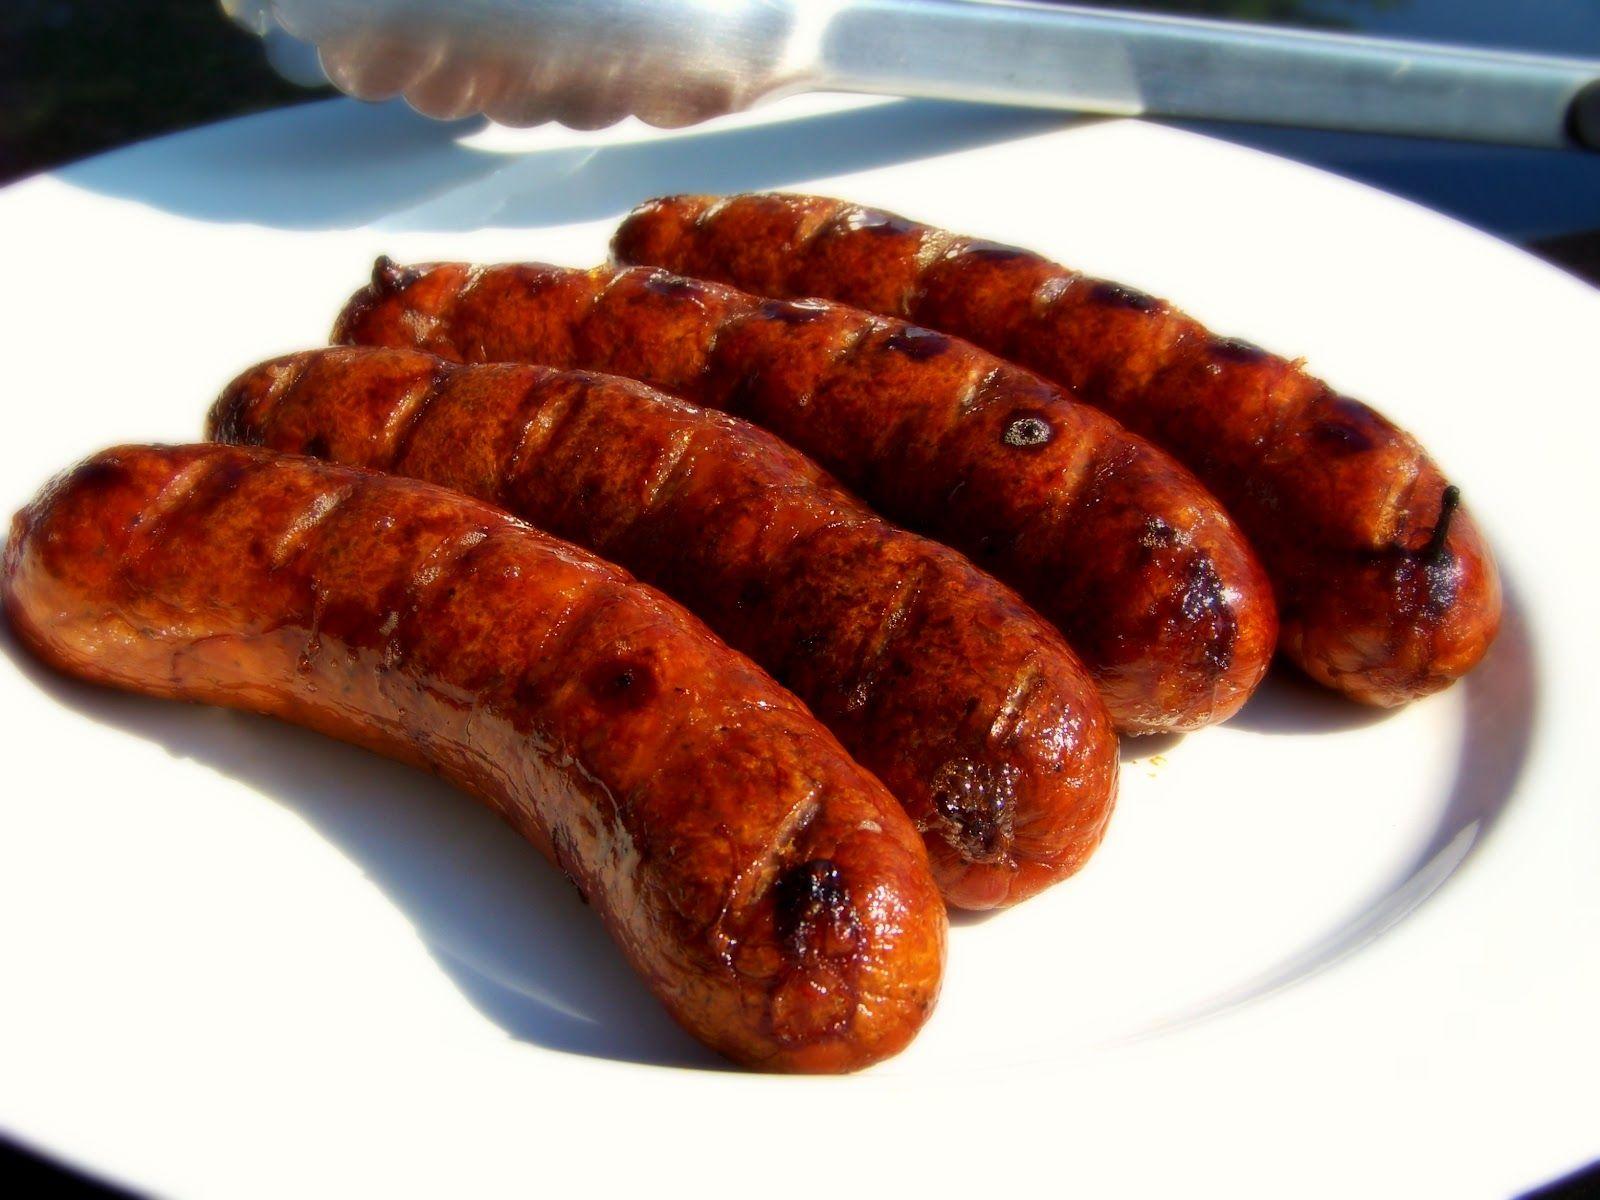 Gallery For > Sausage Wallpaper